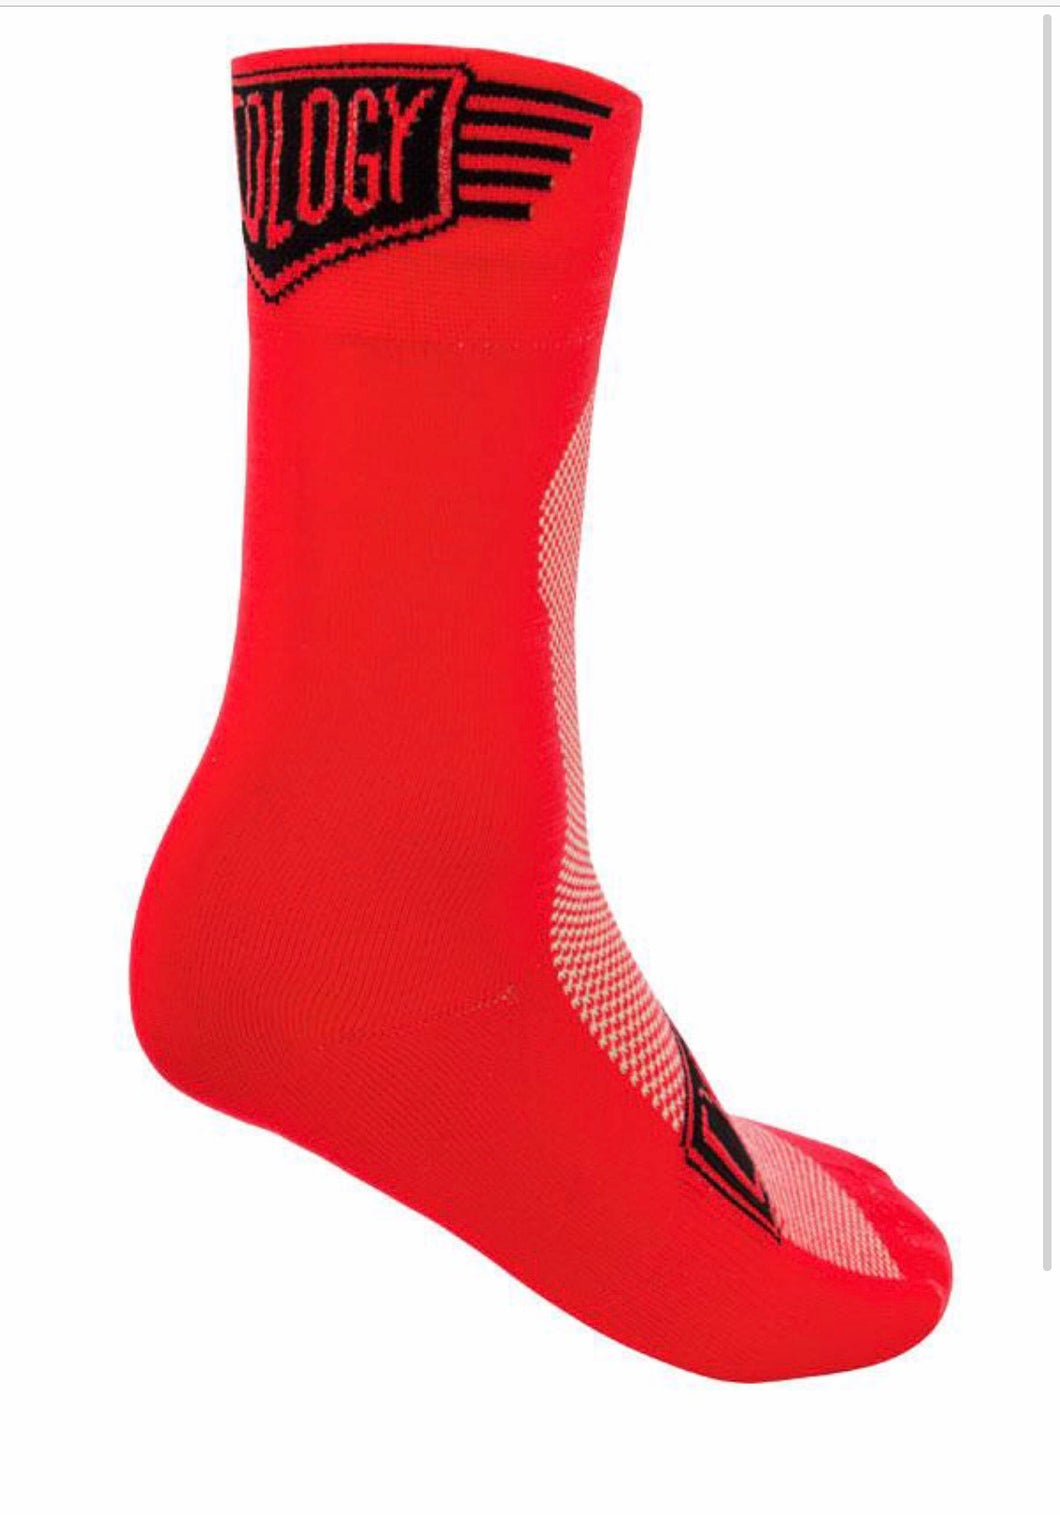 Cycology Quality Unisex Compression Cycling Socks - Design Fluoro Red